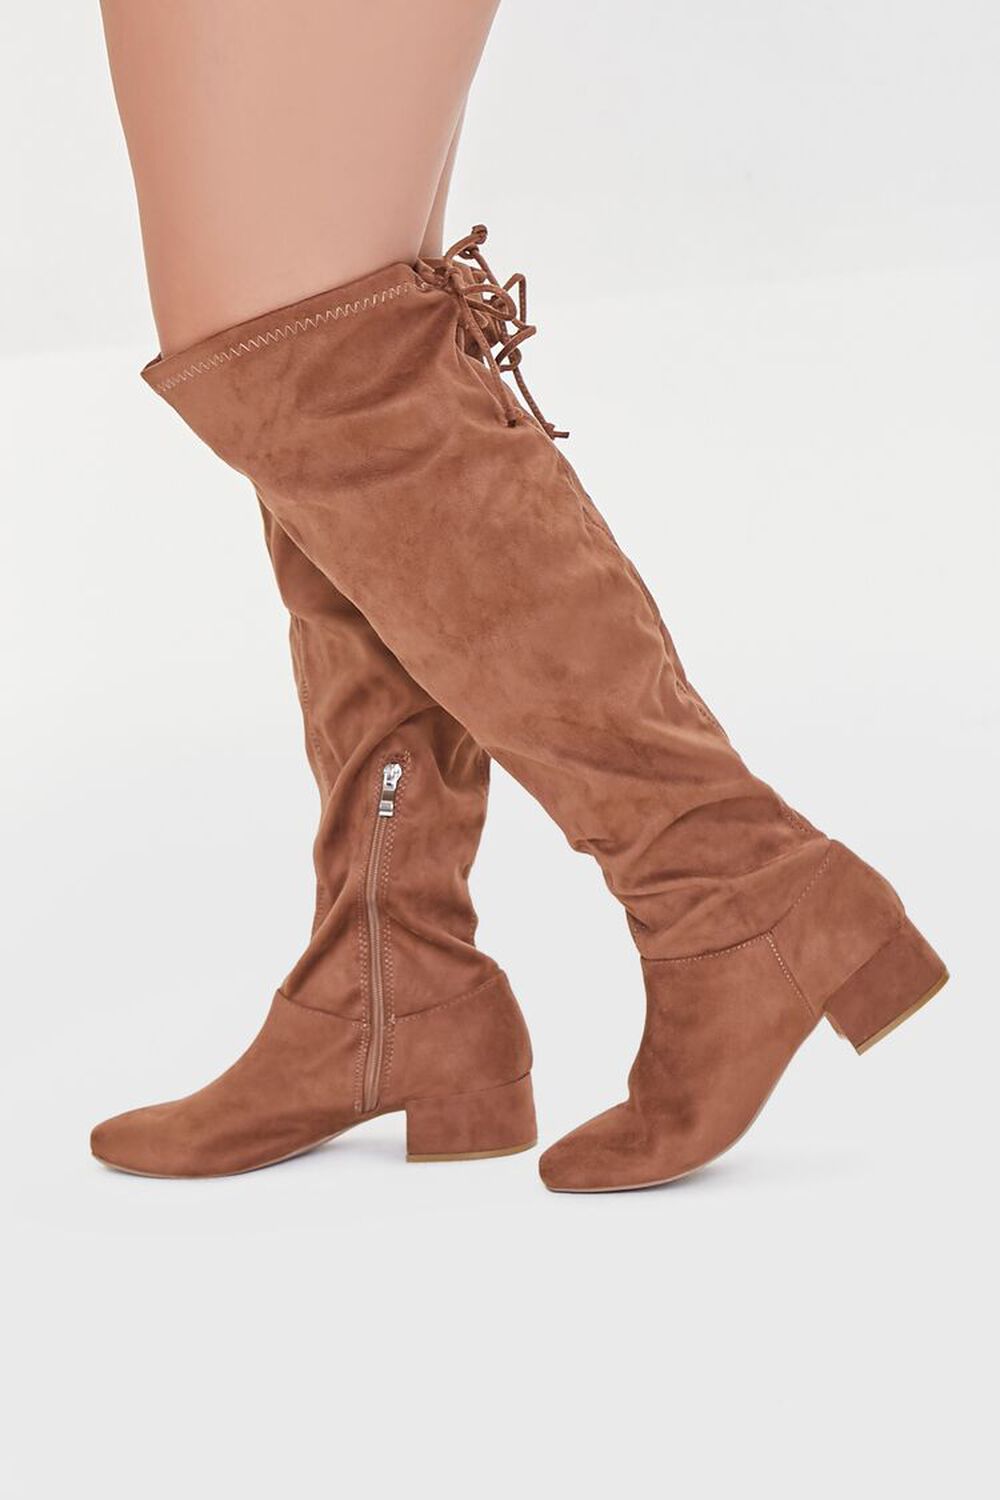 BROWN Knee-High Faux Suede Boots (Wide), image 1